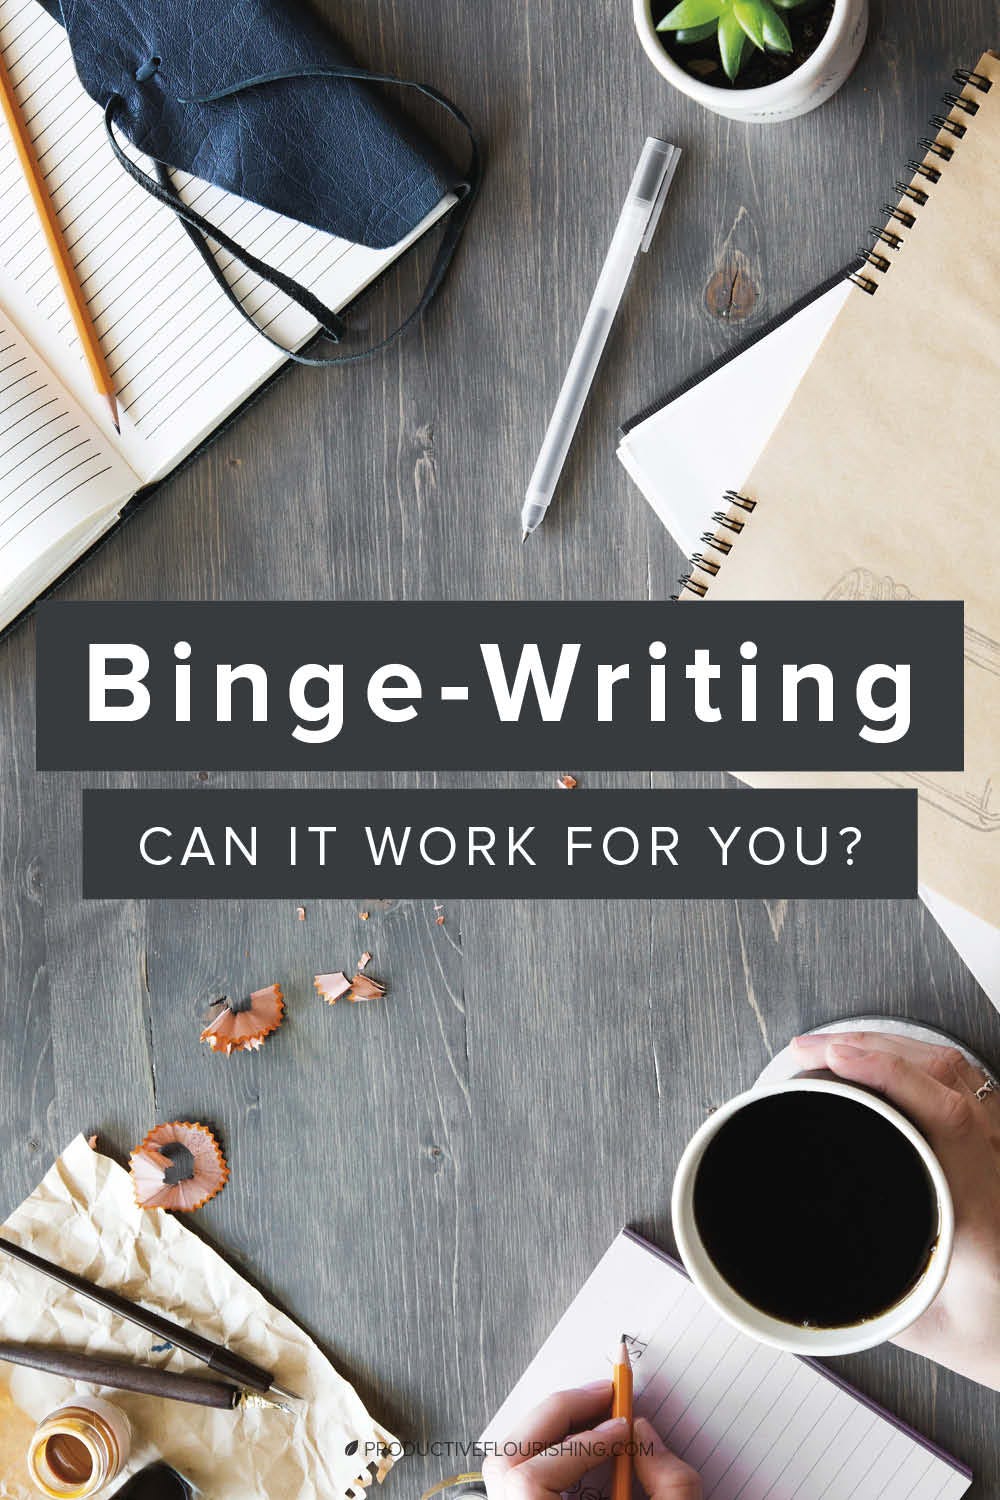 Maybe you’re going through a busy spell. It might be a hectic day job, the need to hustle hard with your freelancing, or caring responsibilities for kids or elderly parents. You may have to accept that you can’t move forward as fast as you’d like with your writing projects. What sort of binge writing schedule could work around the reality of your life right now? Find out in this blog post. #timemanagement #writerschedule #productiveflourishing 